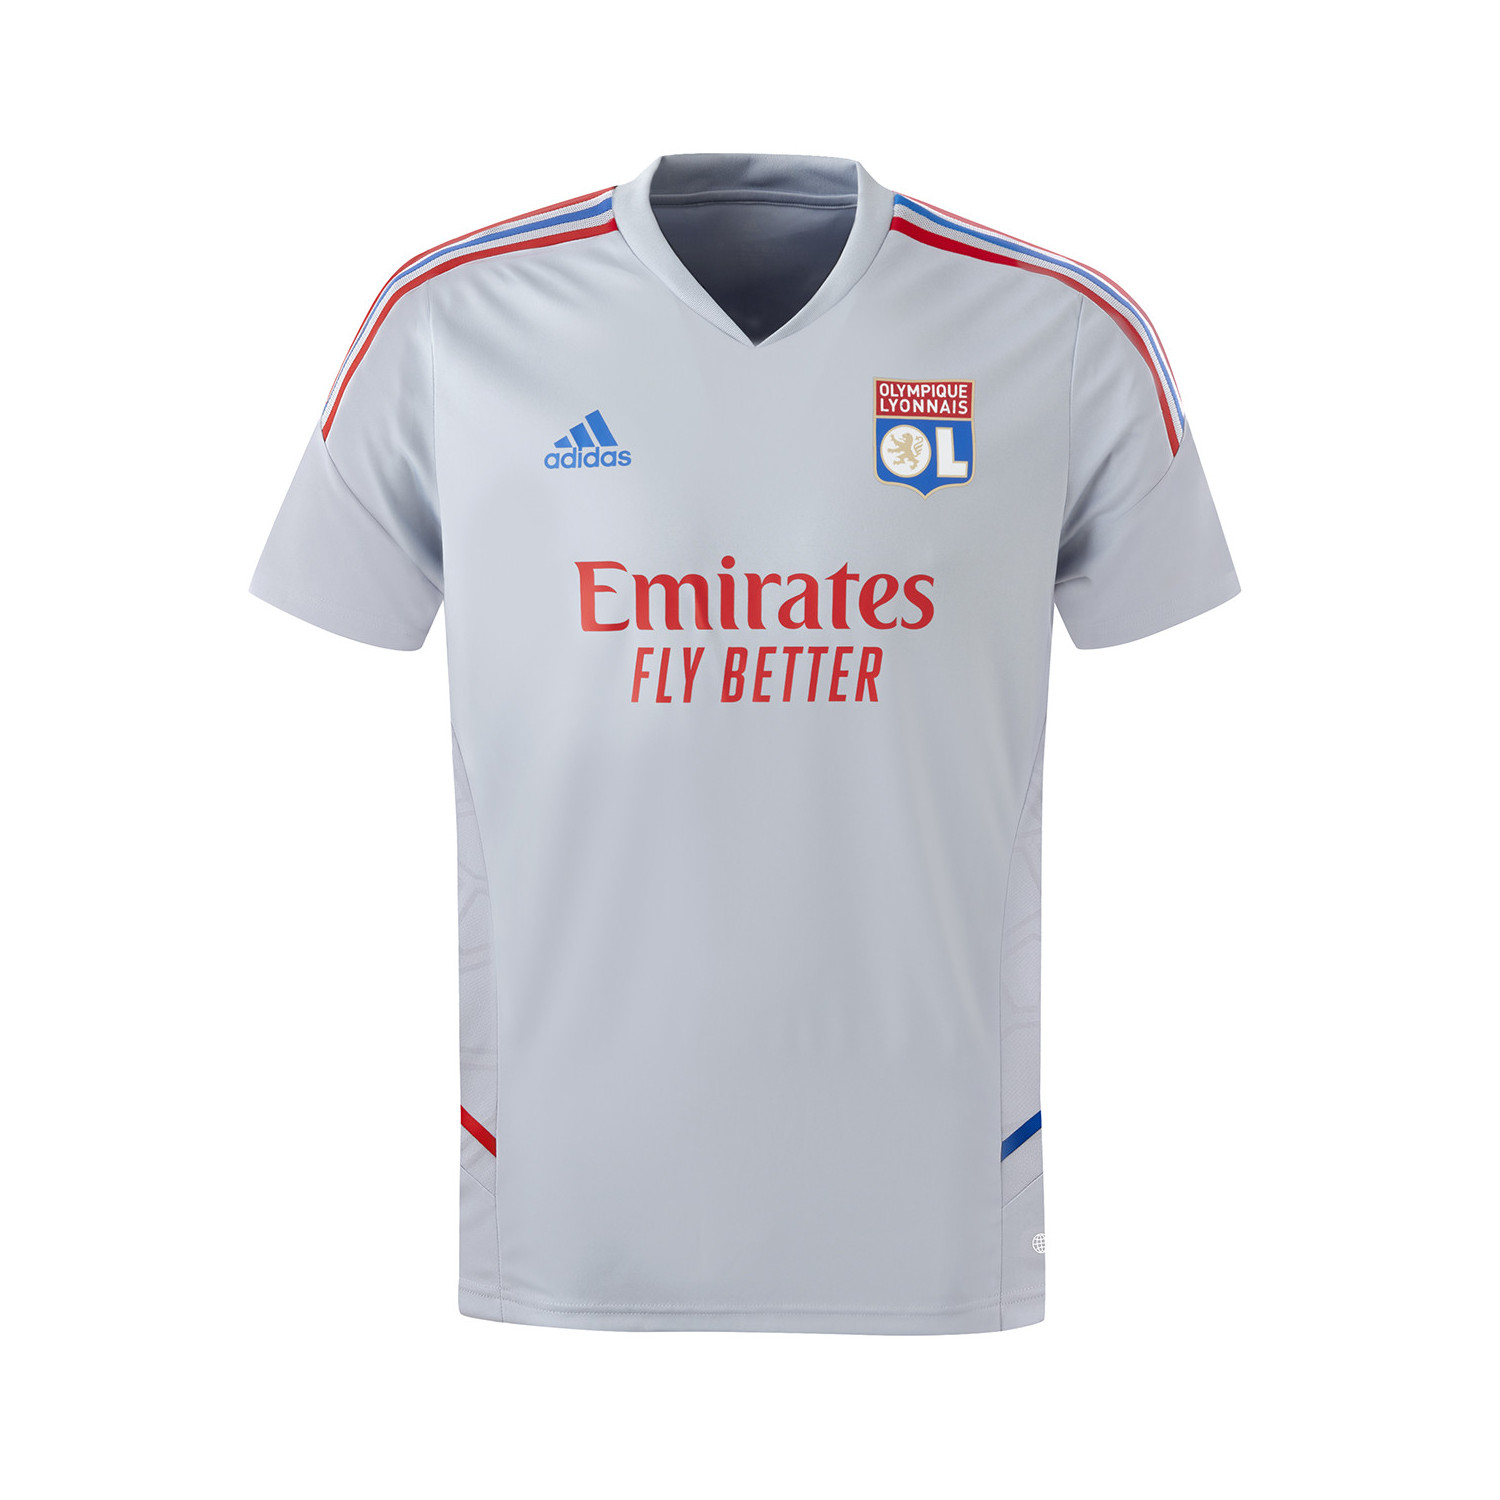 Maillots foot homme - Olympique Lyonnais